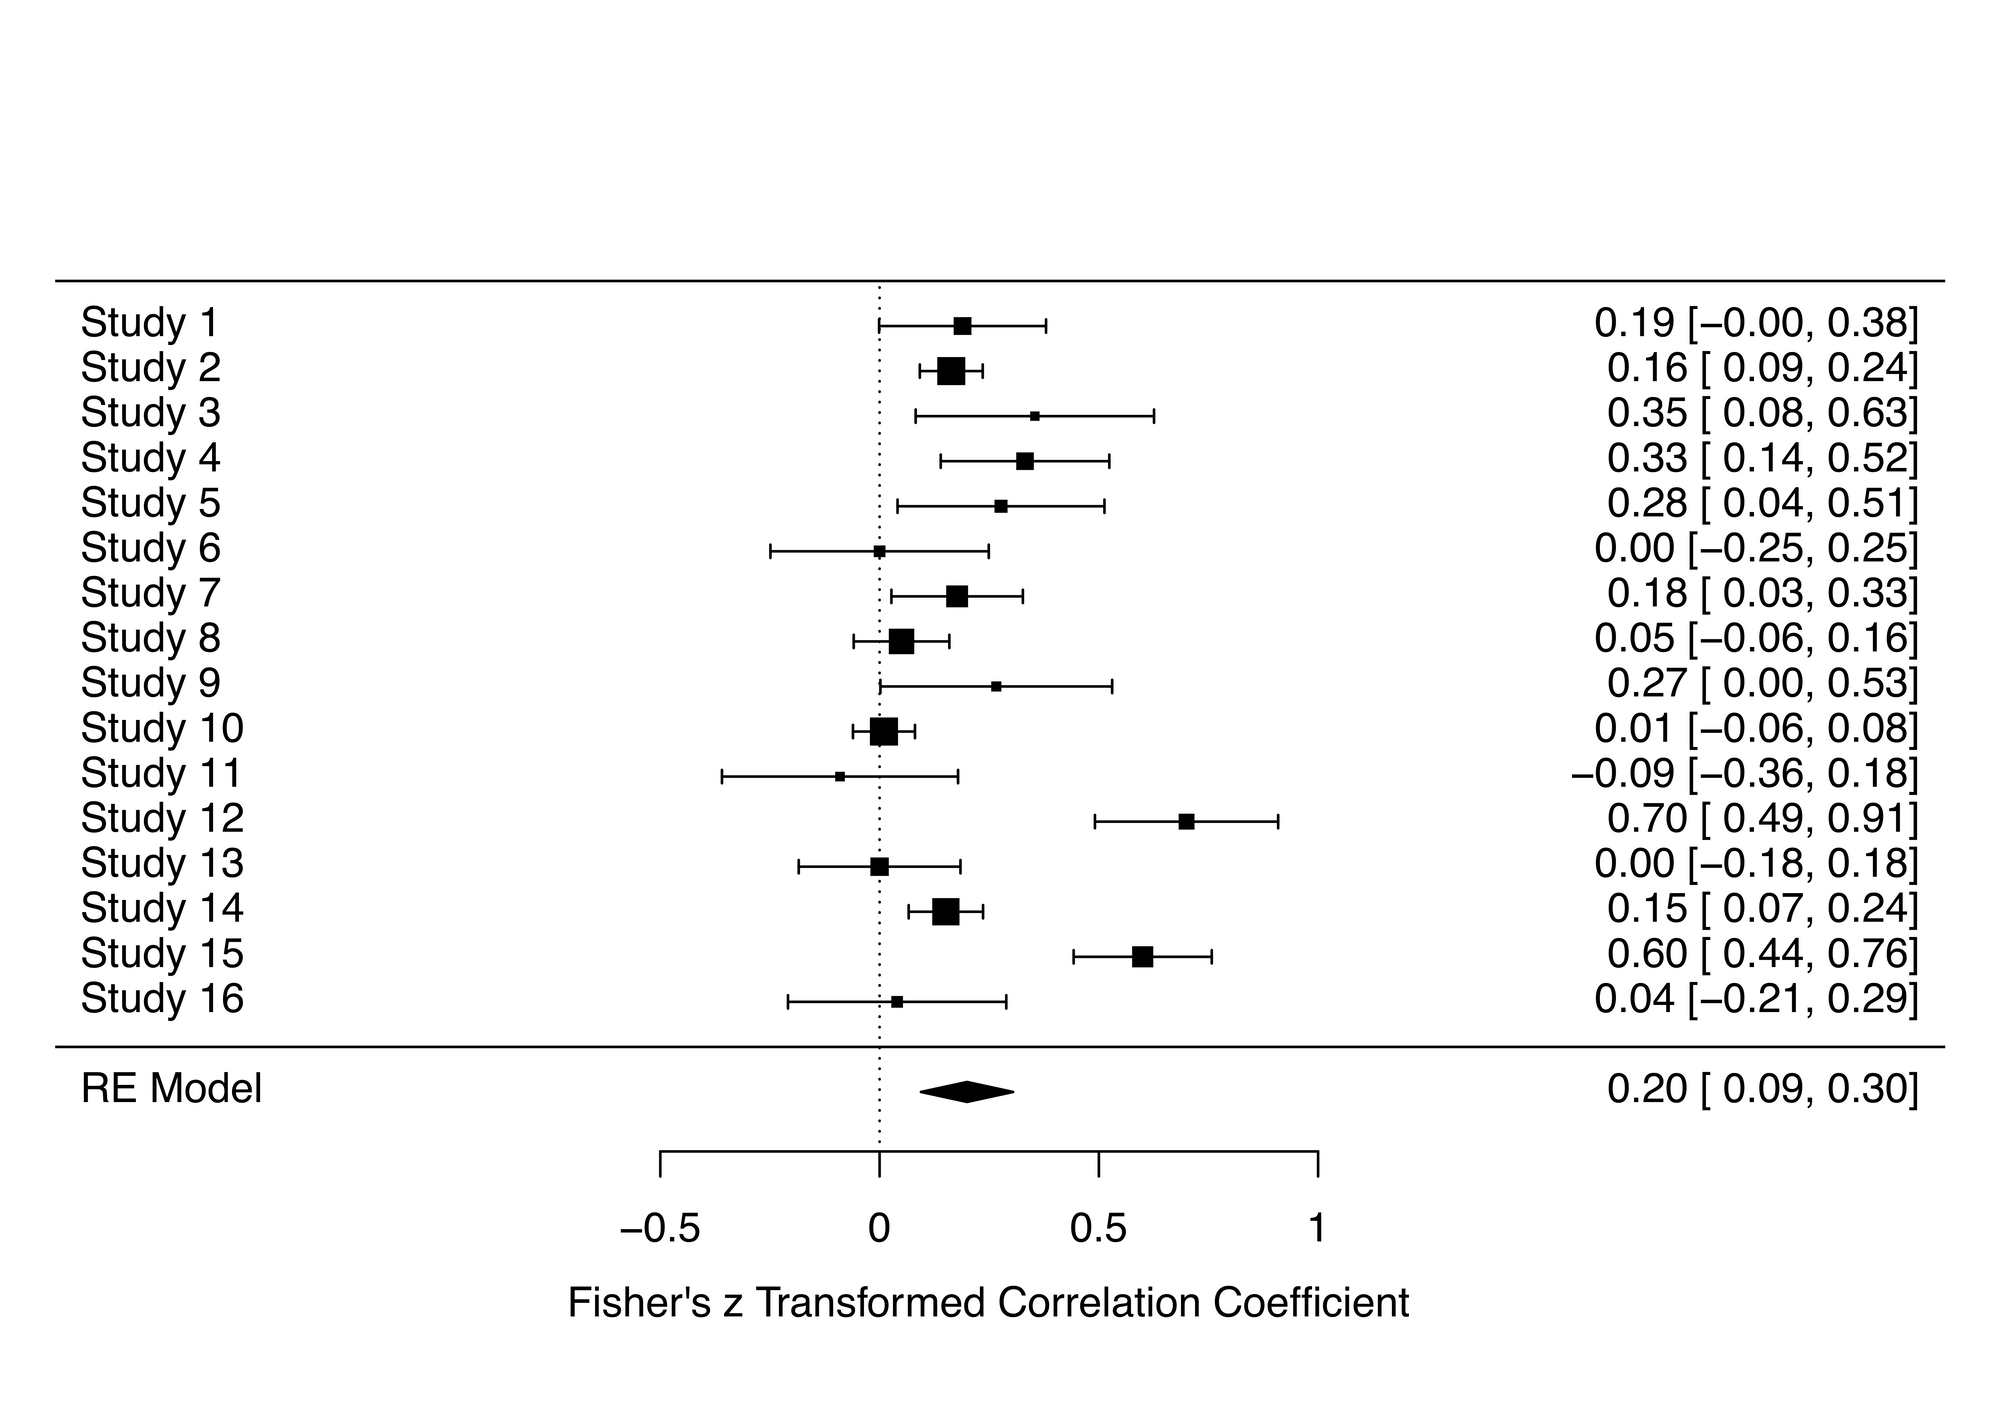 Oh my GOSH: Calculating all possible meta-analysis study combinations